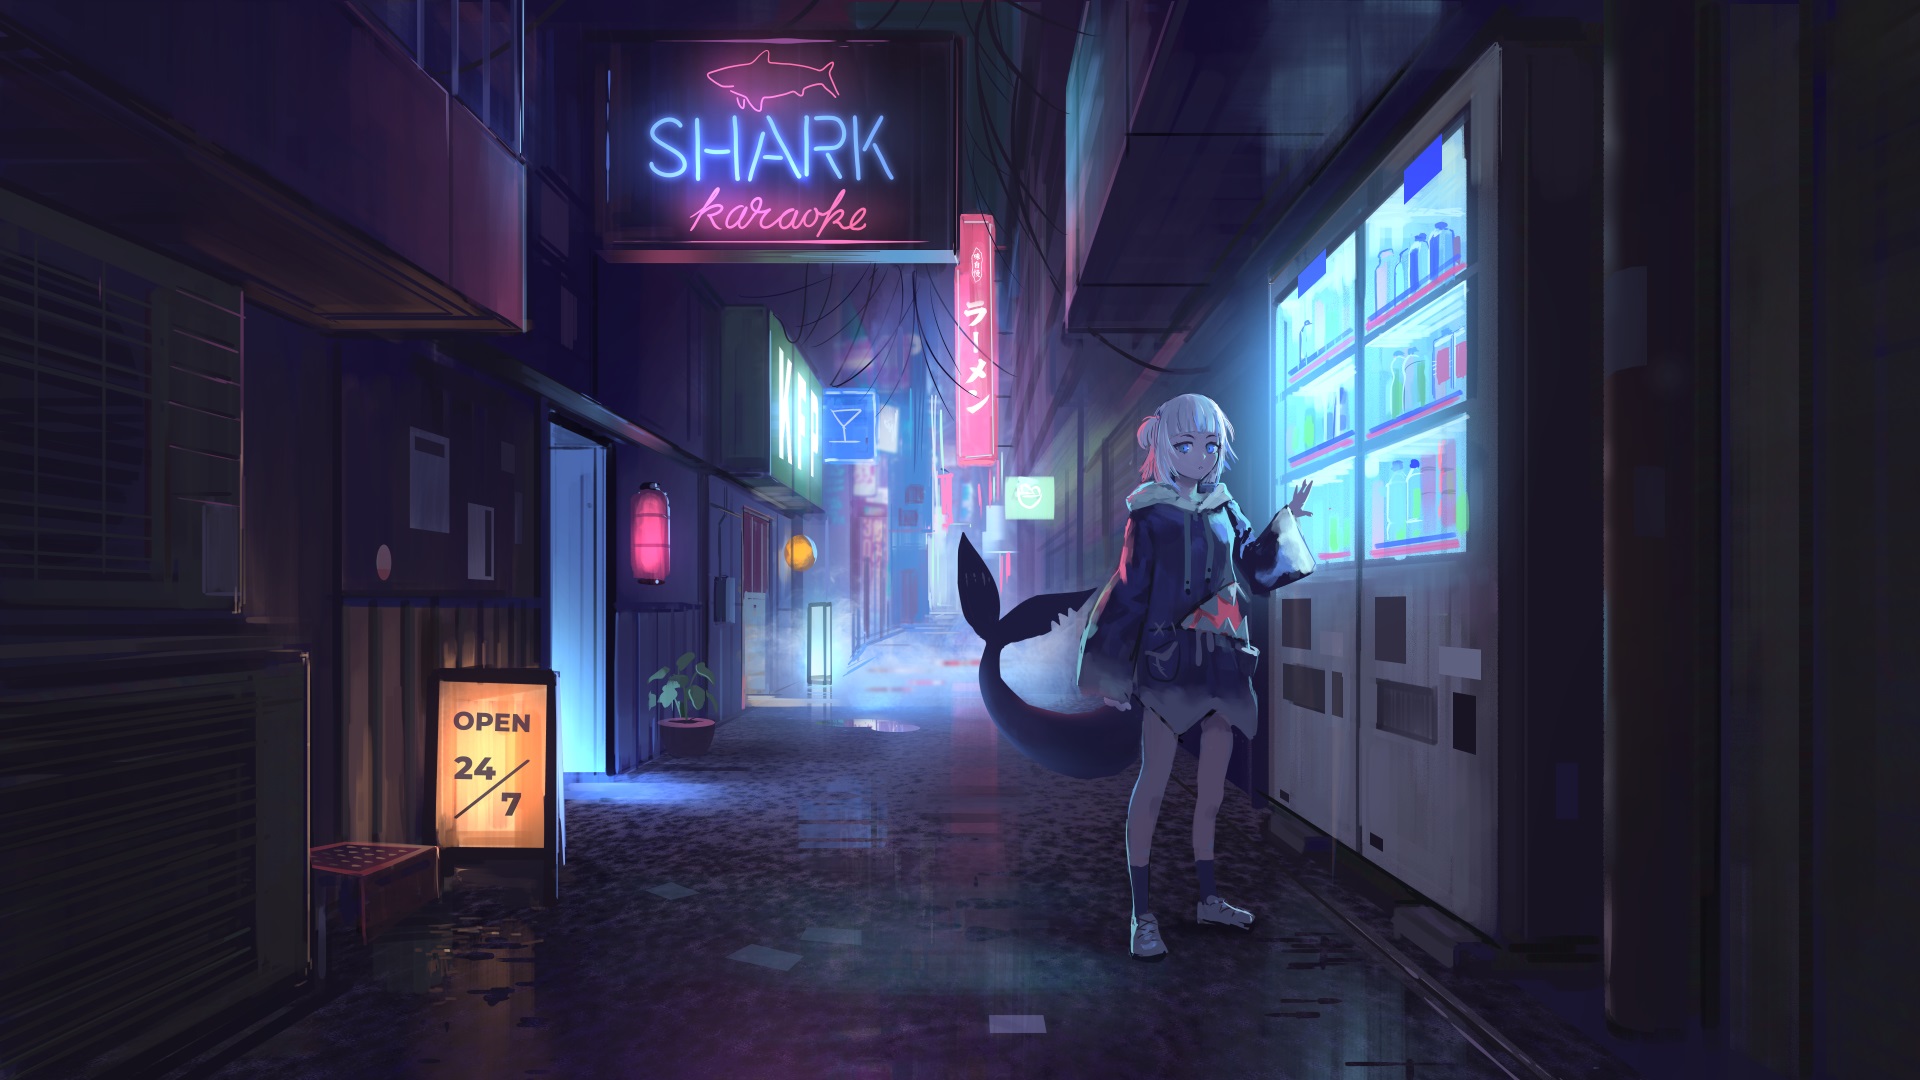 There’s a surprising number of Gura in a city at night art.